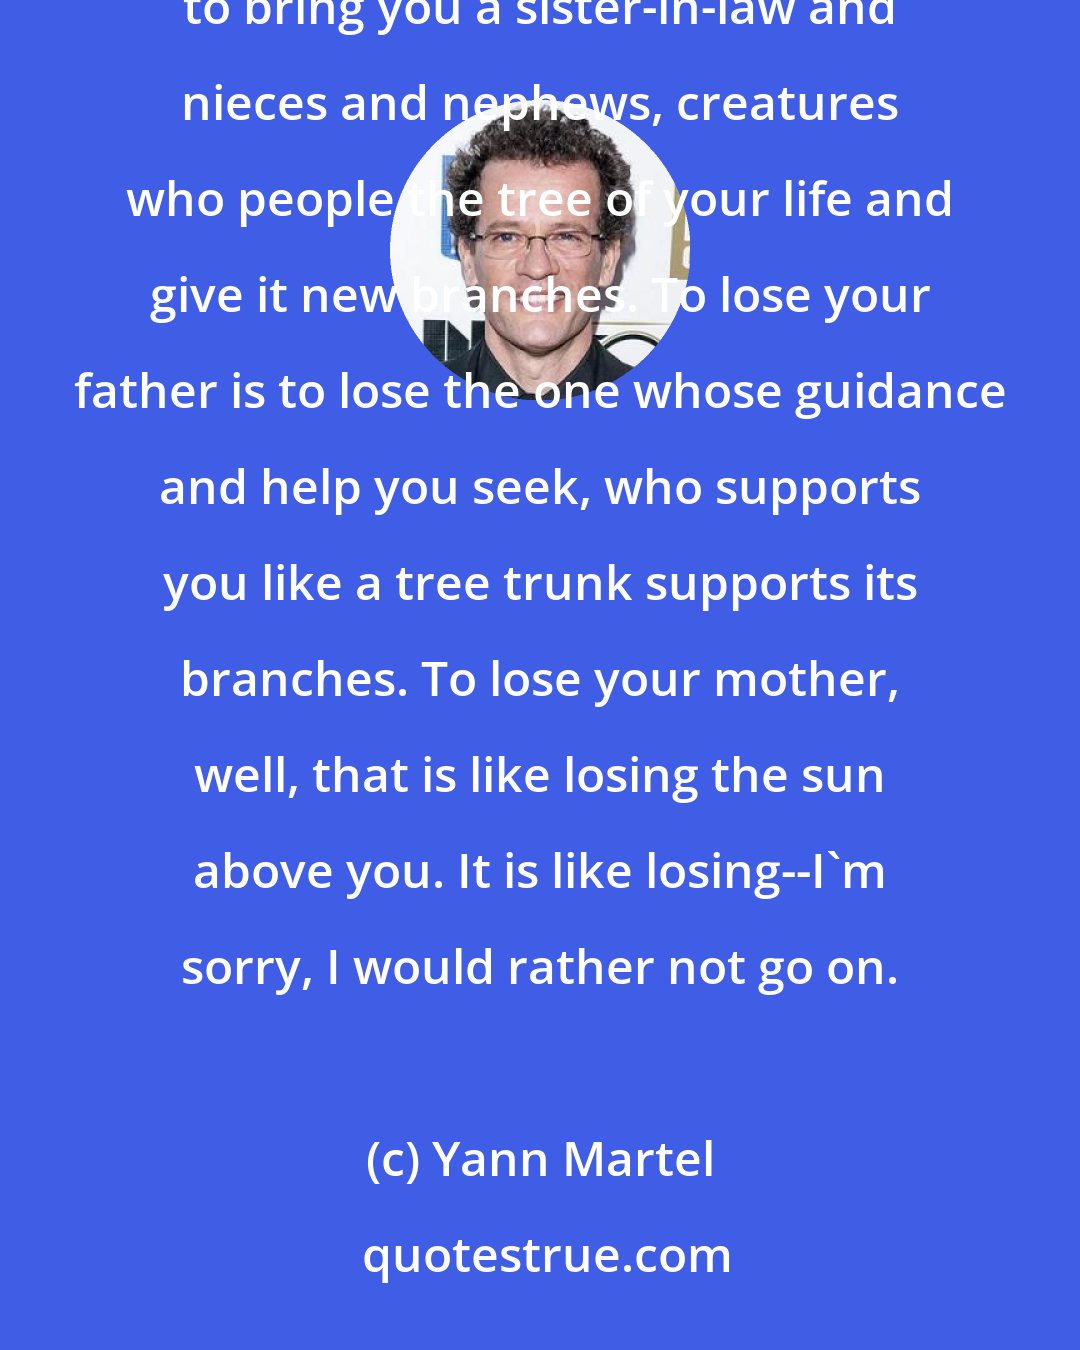 Yann Martel: To lose a brother is to lose someone with whom you can share the experience of growing old, who is supposed to bring you a sister-in-law and nieces and nephews, creatures who people the tree of your life and give it new branches. To lose your father is to lose the one whose guidance and help you seek, who supports you like a tree trunk supports its branches. To lose your mother, well, that is like losing the sun above you. It is like losing--I'm sorry, I would rather not go on.